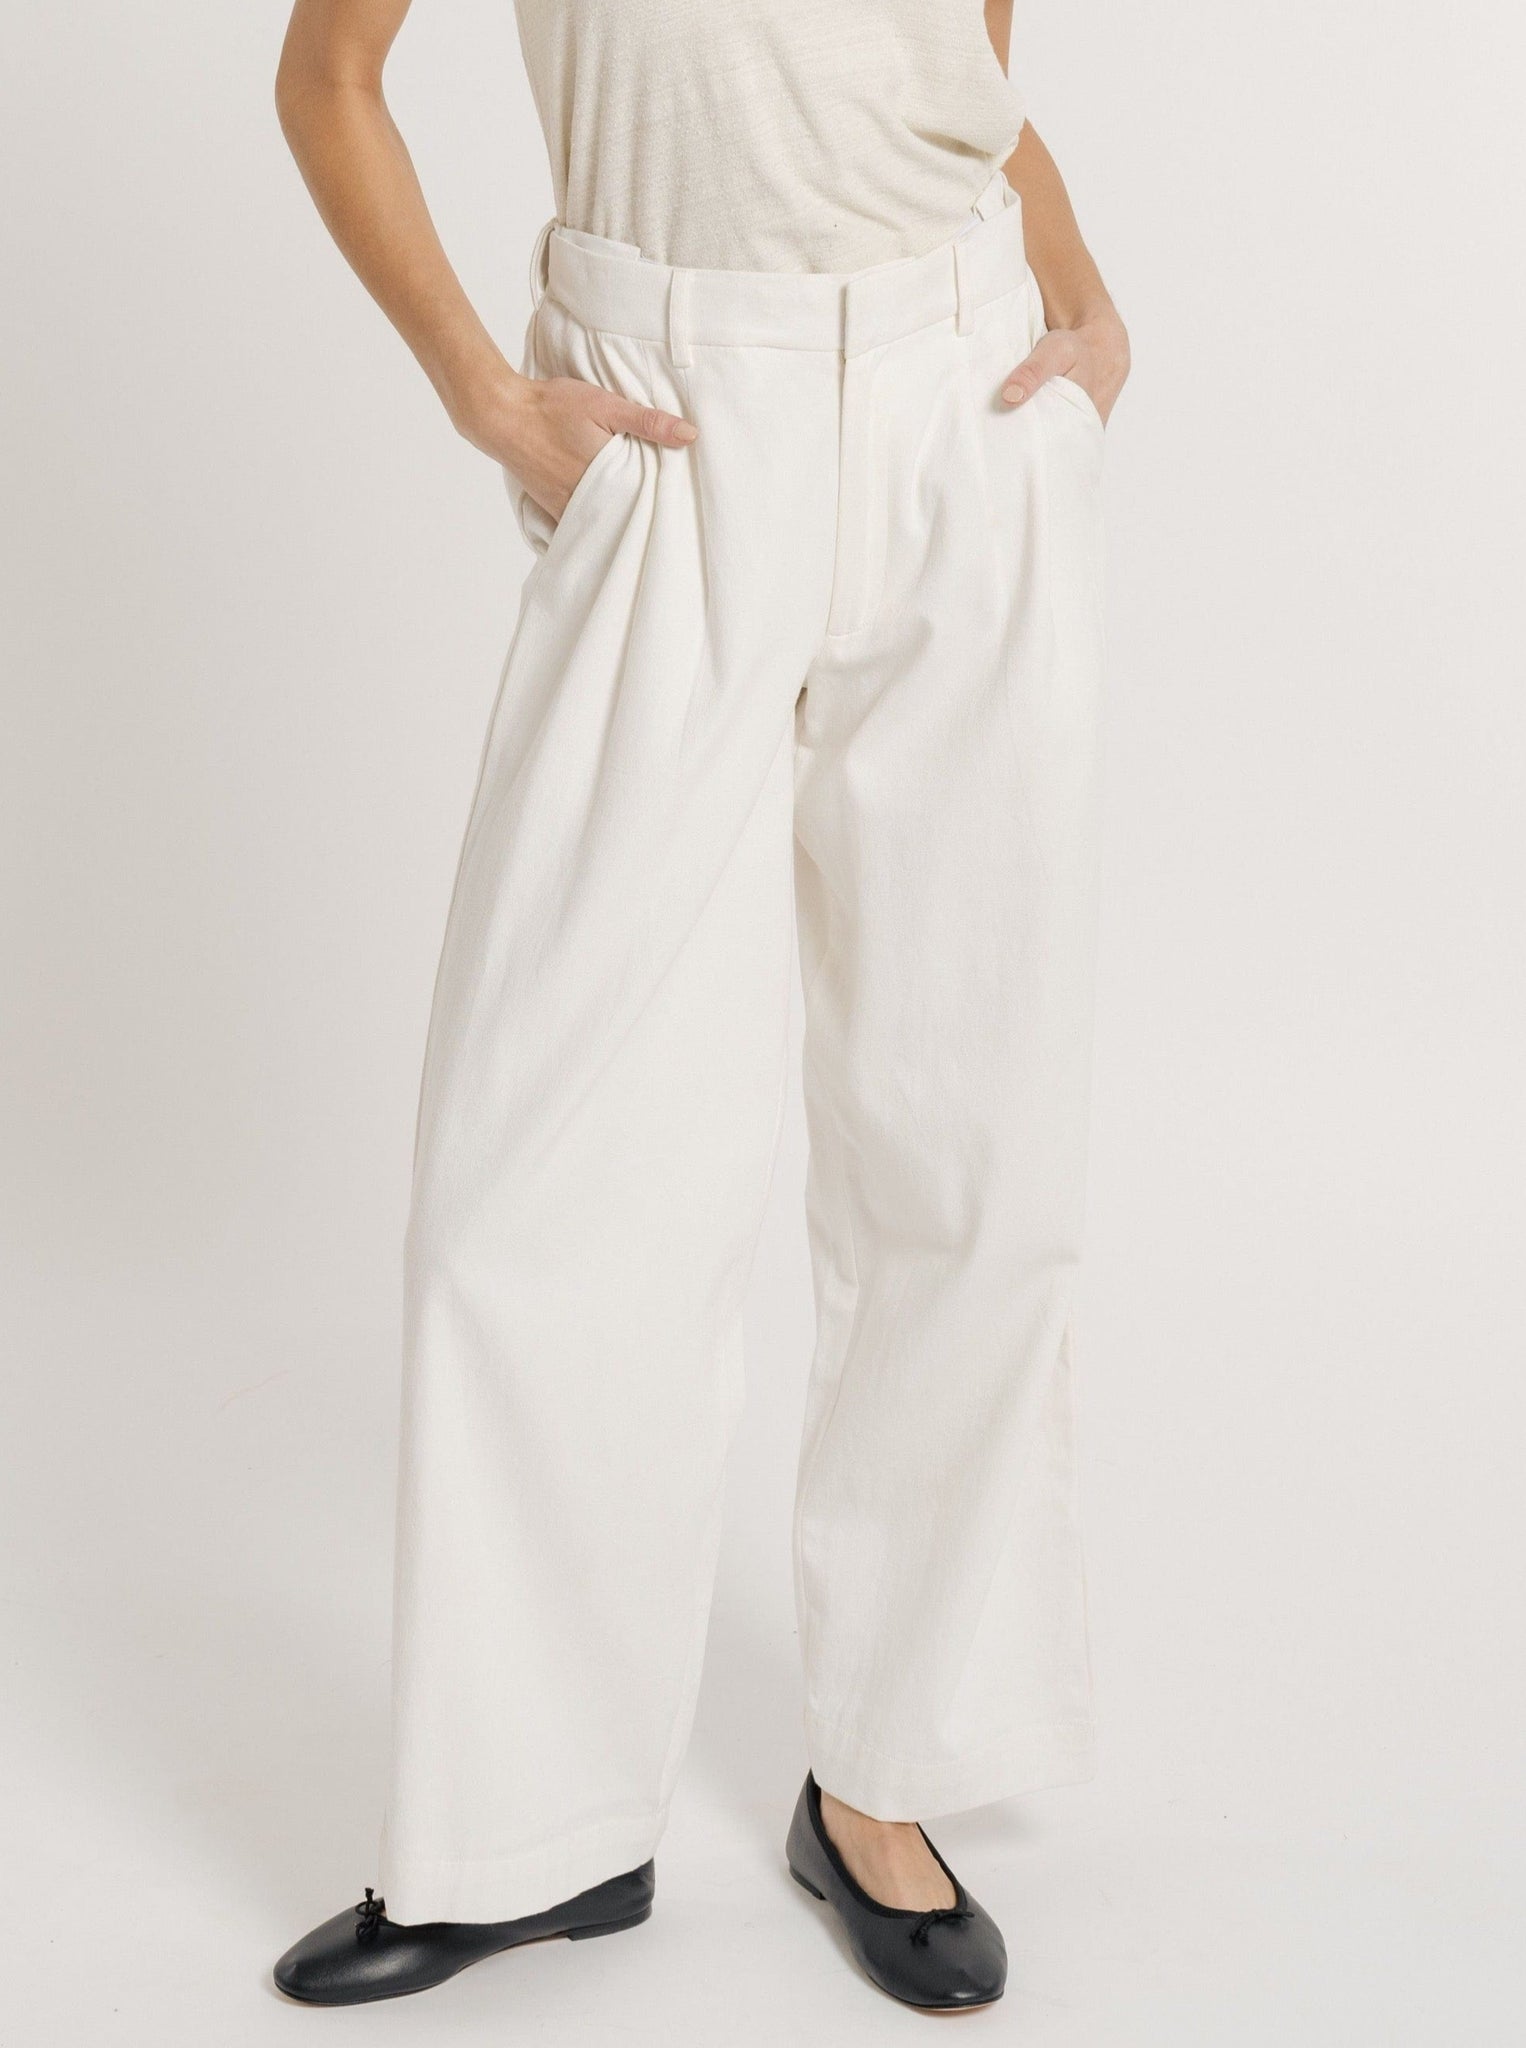 The model is wearing an Alfred Trouser - Ivory.